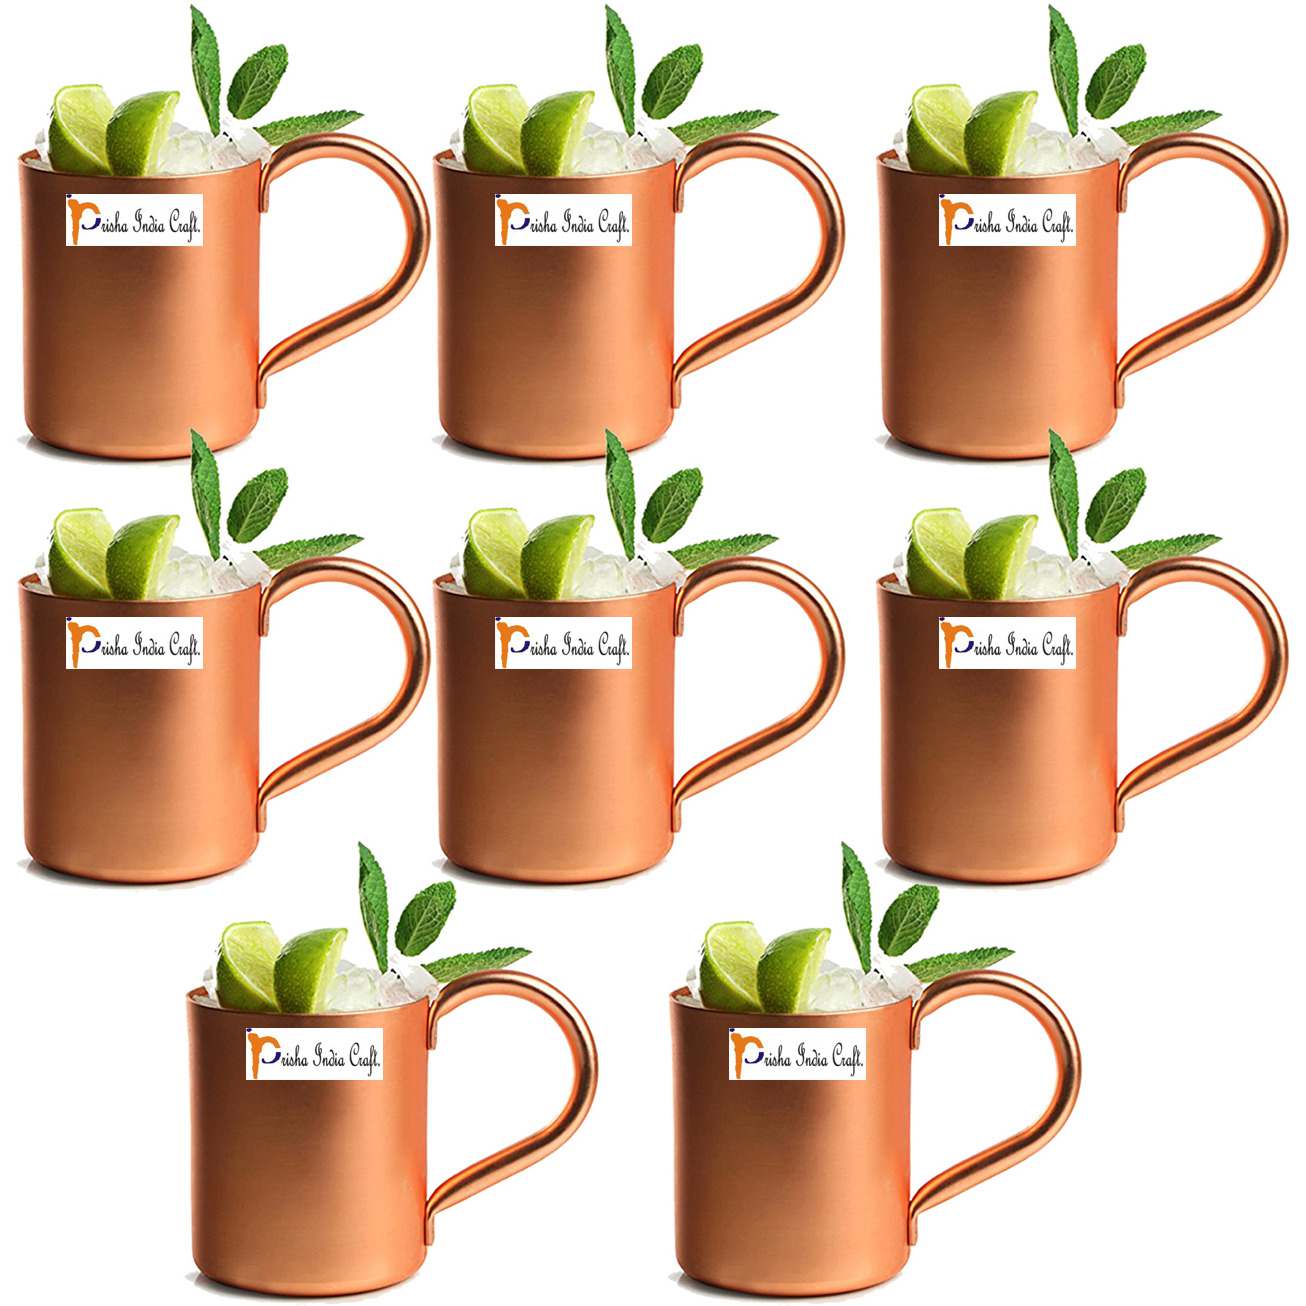 Set of 8 - Prisha India Craft B. Copper Mug for Moscow Mules 450 ML / 15 oz - 100% pure copper - Lacquered Finish - Solid Copper Best Quality Mug, Moscow Mule Cup, Copper Mugs, Cocktail Mugs Gift Idea